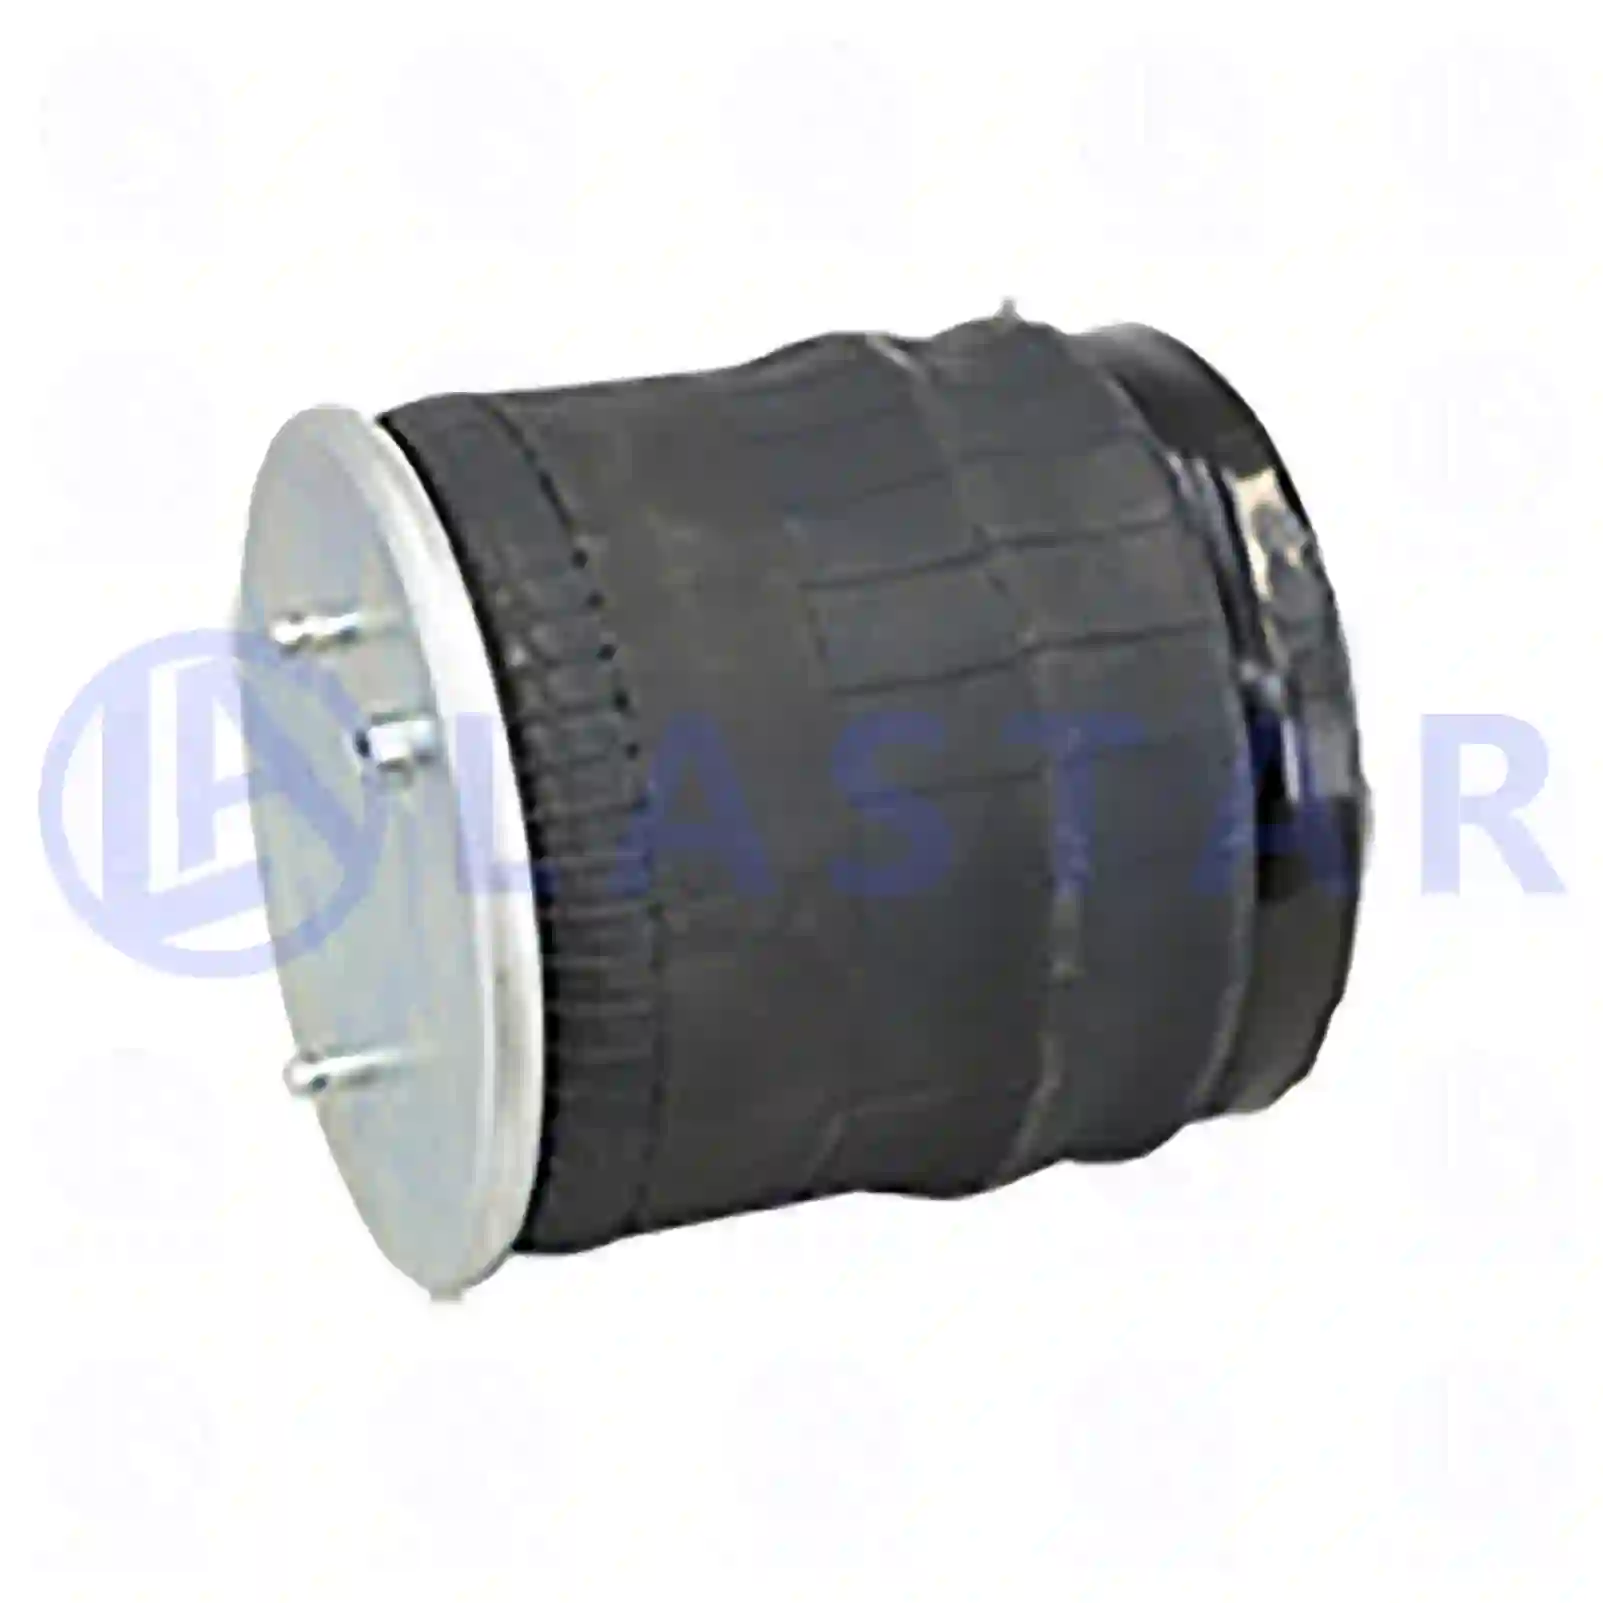 Air spring, with steel piston, 77727074, 1726238, ZG40742-0008, , ||  77727074 Lastar Spare Part | Truck Spare Parts, Auotomotive Spare Parts Air spring, with steel piston, 77727074, 1726238, ZG40742-0008, , ||  77727074 Lastar Spare Part | Truck Spare Parts, Auotomotive Spare Parts